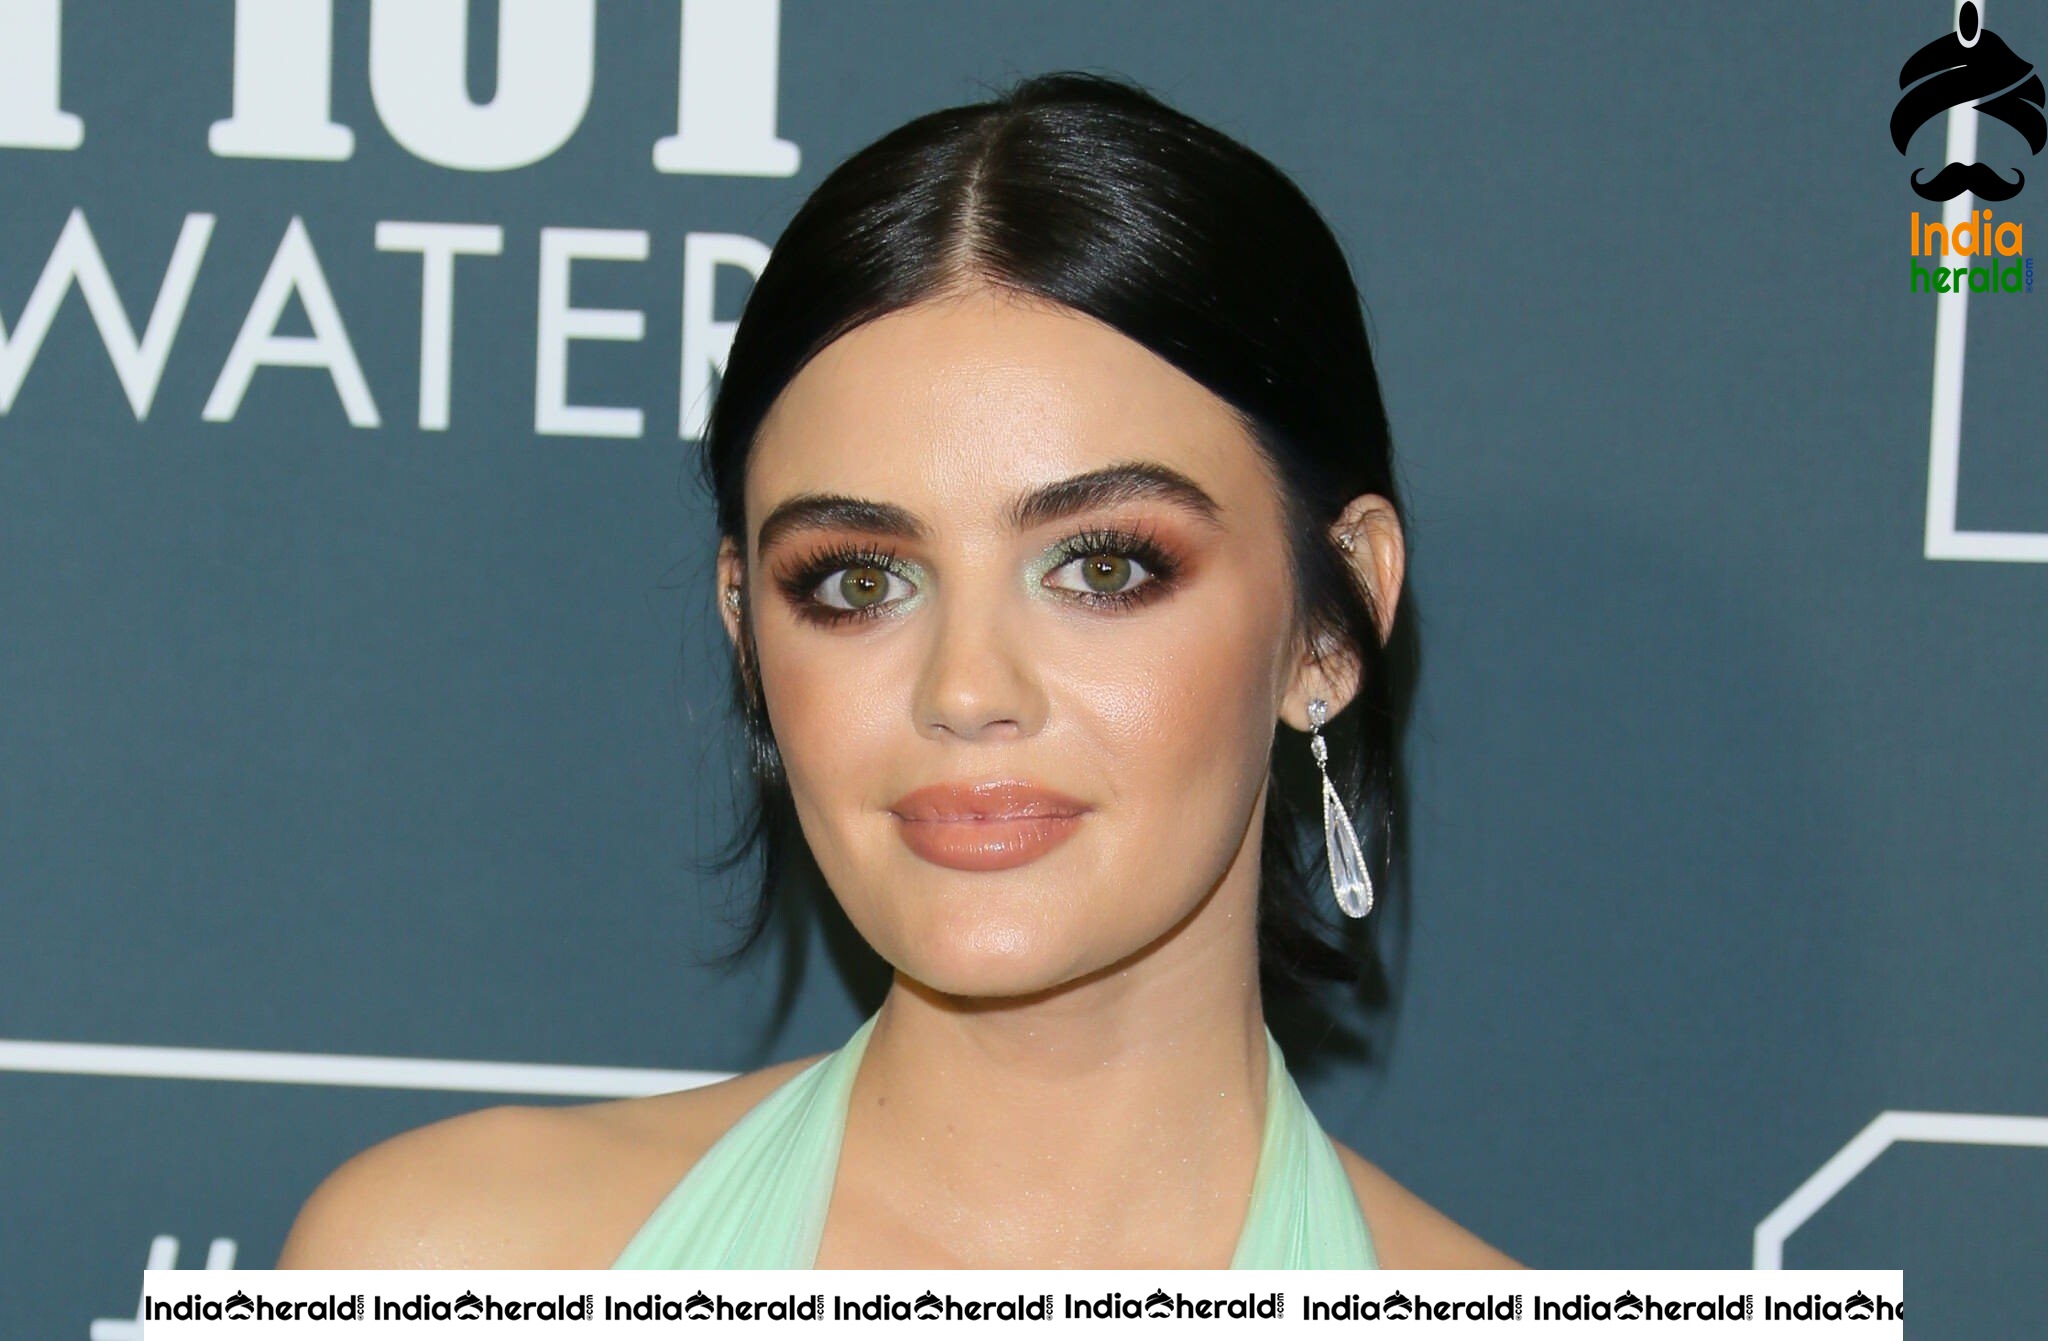 Lucy Hale at 25th Annual Critics Choice Awards Set 2